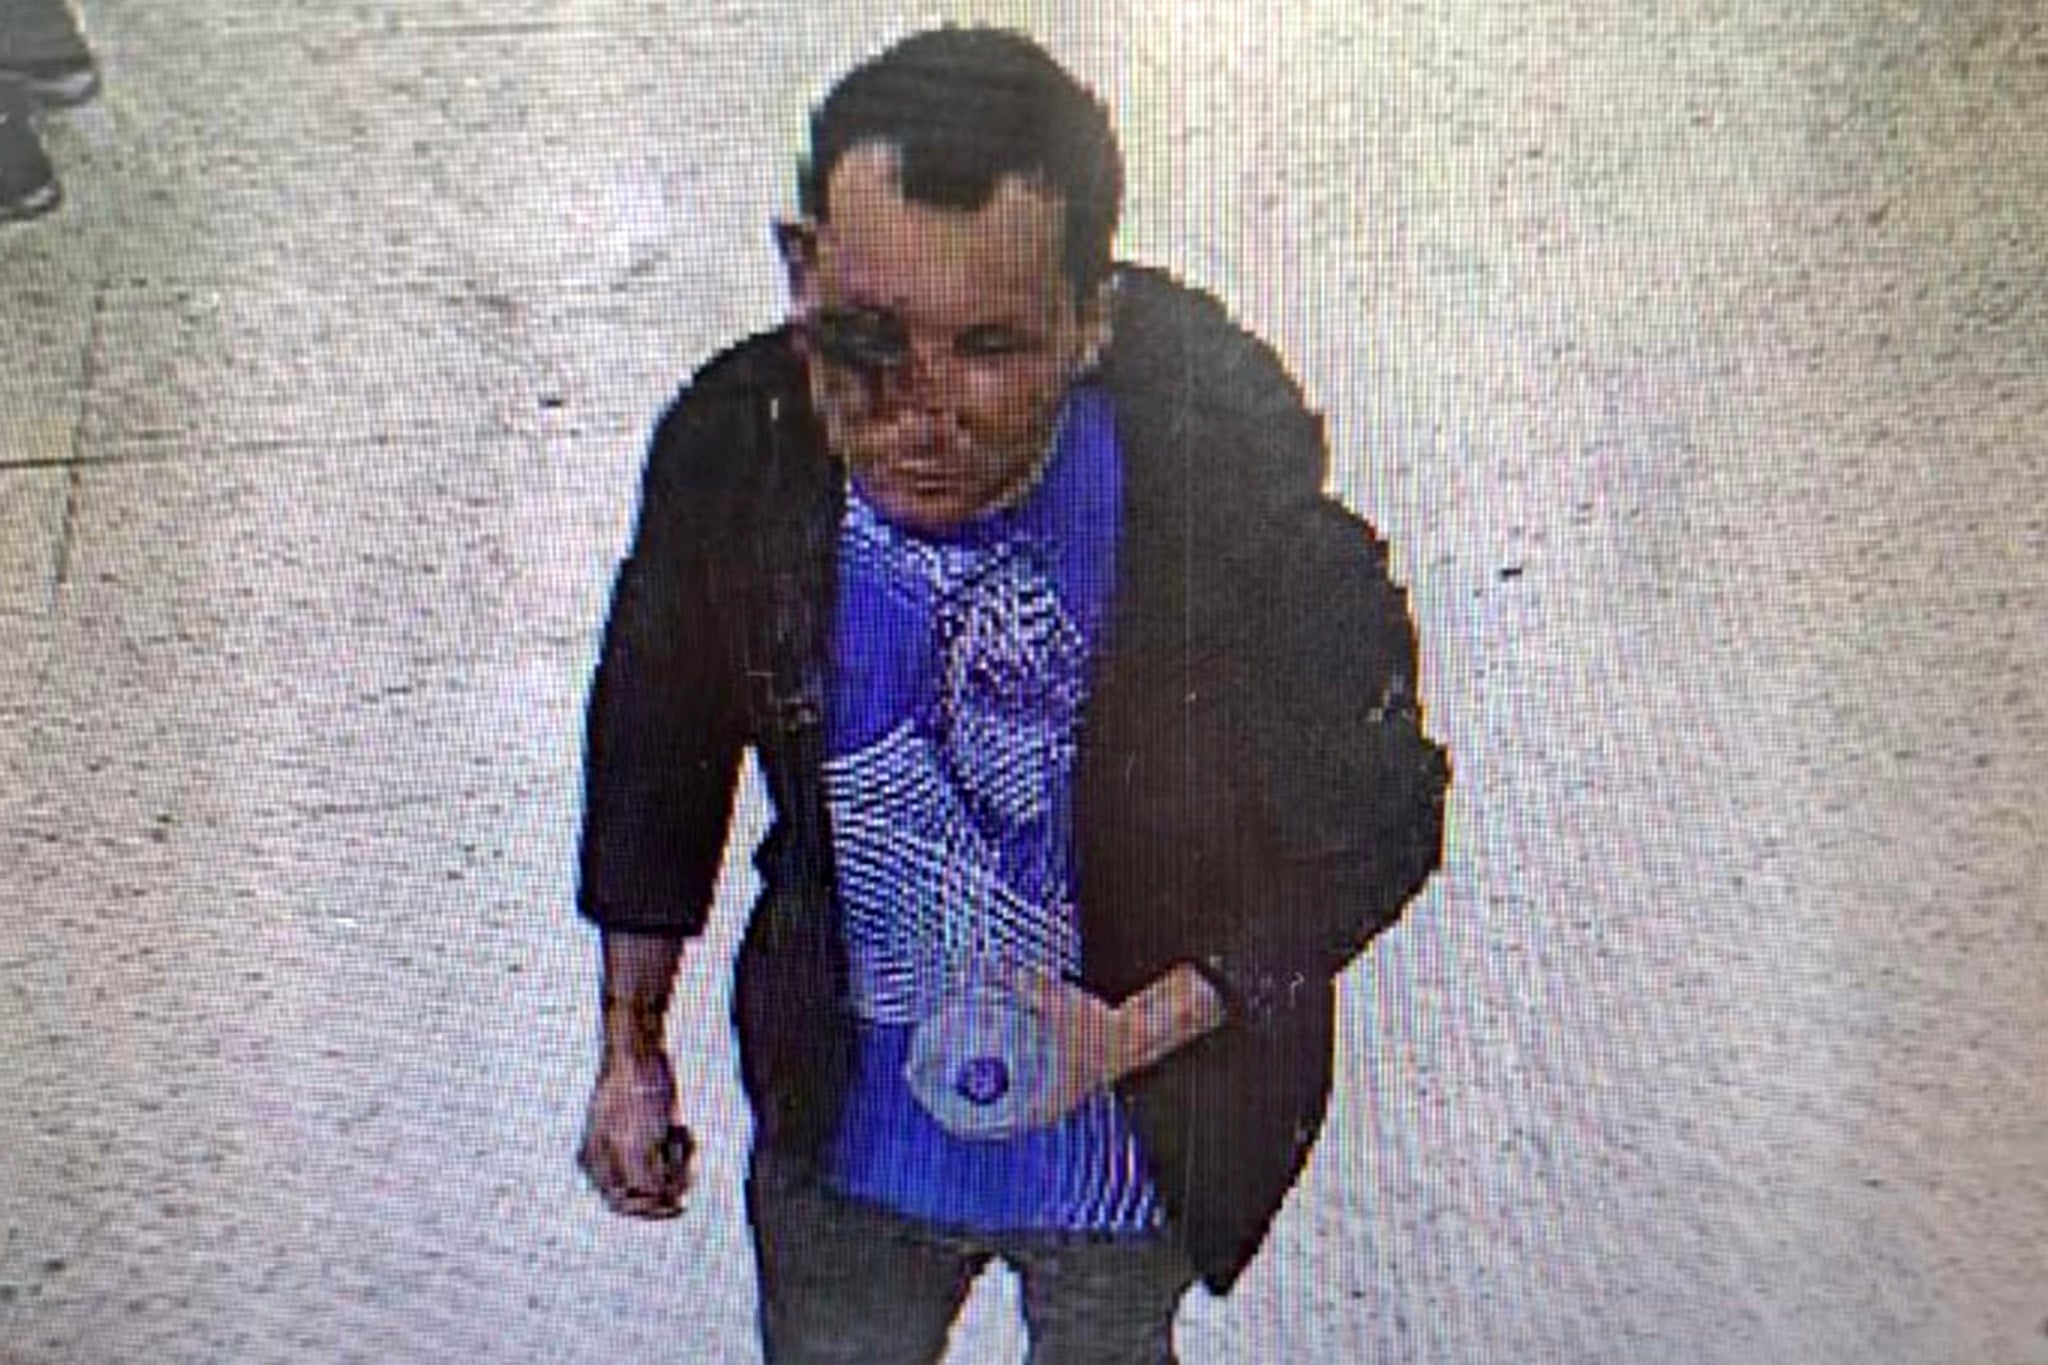 The suspect is seen on CCTV leaving Tesco at 21 Caledonian Road.